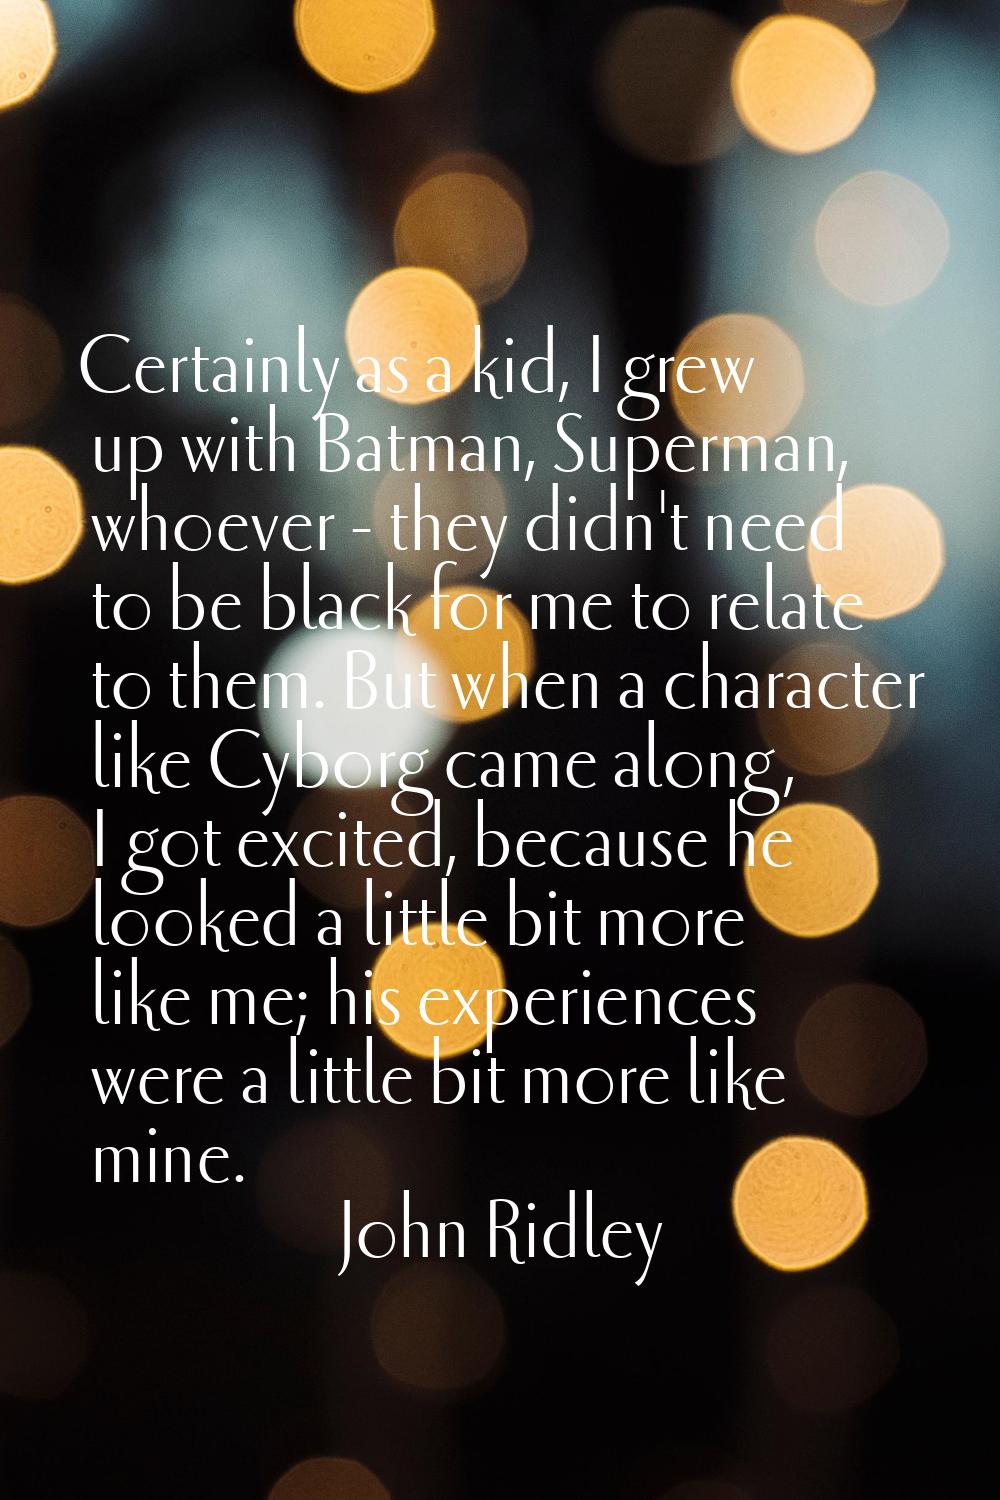 Certainly as a kid, I grew up with Batman, Superman, whoever - they didn't need to be black for me 